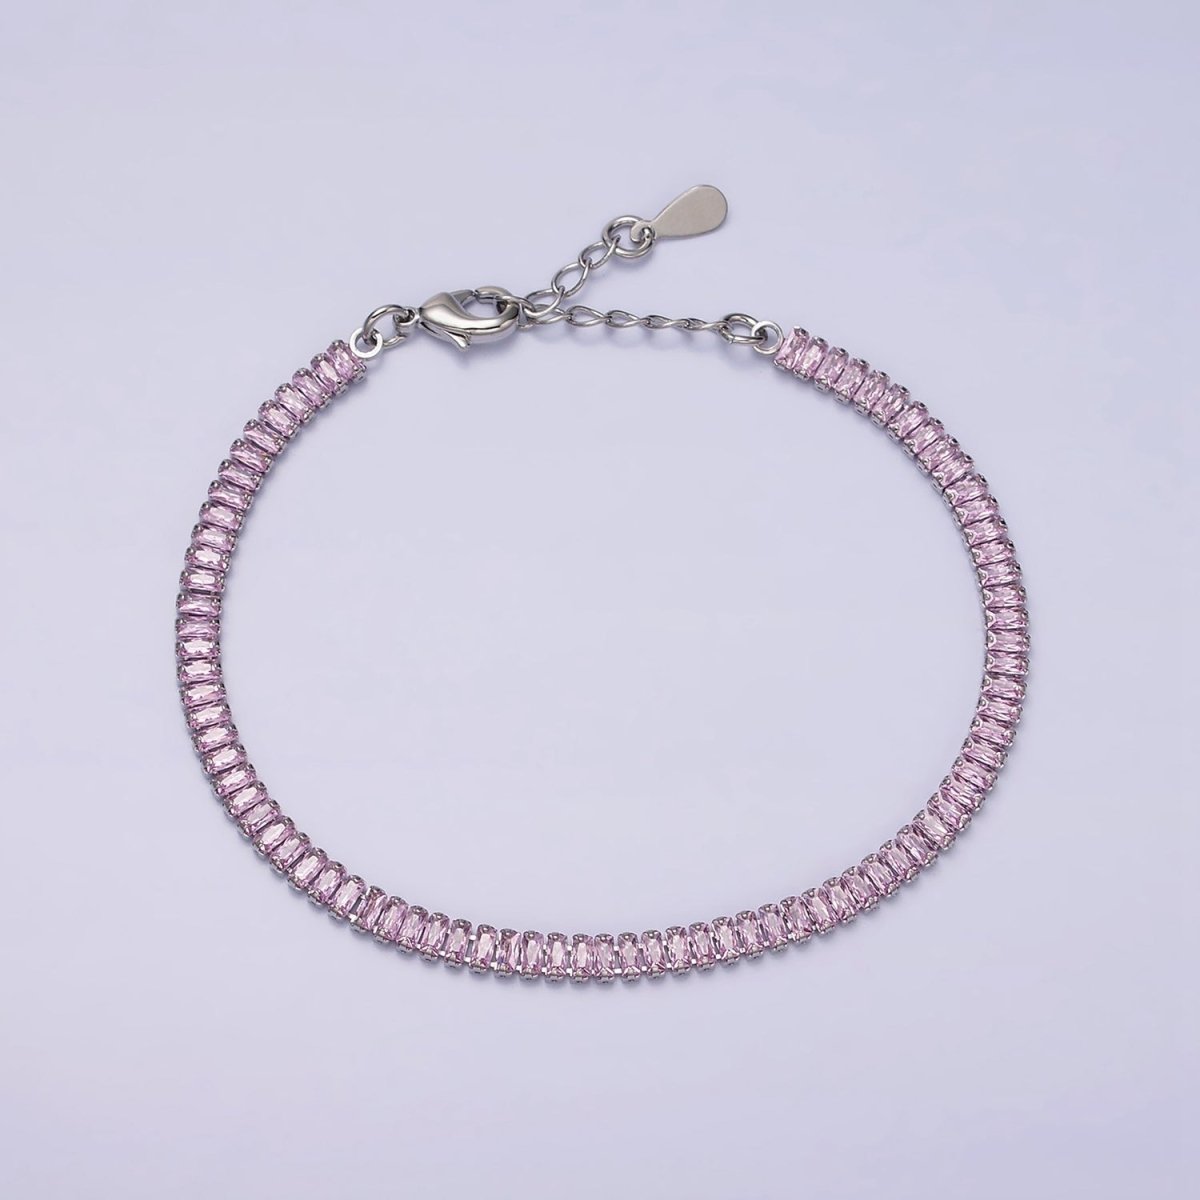 16K Gold Filled Clear, Pink Baguette CZ 3.5mm Tennis Chain 6.5 Inch Bracelet | WA-1820 - WA-1823 Clearance Pricing - DLUXCA